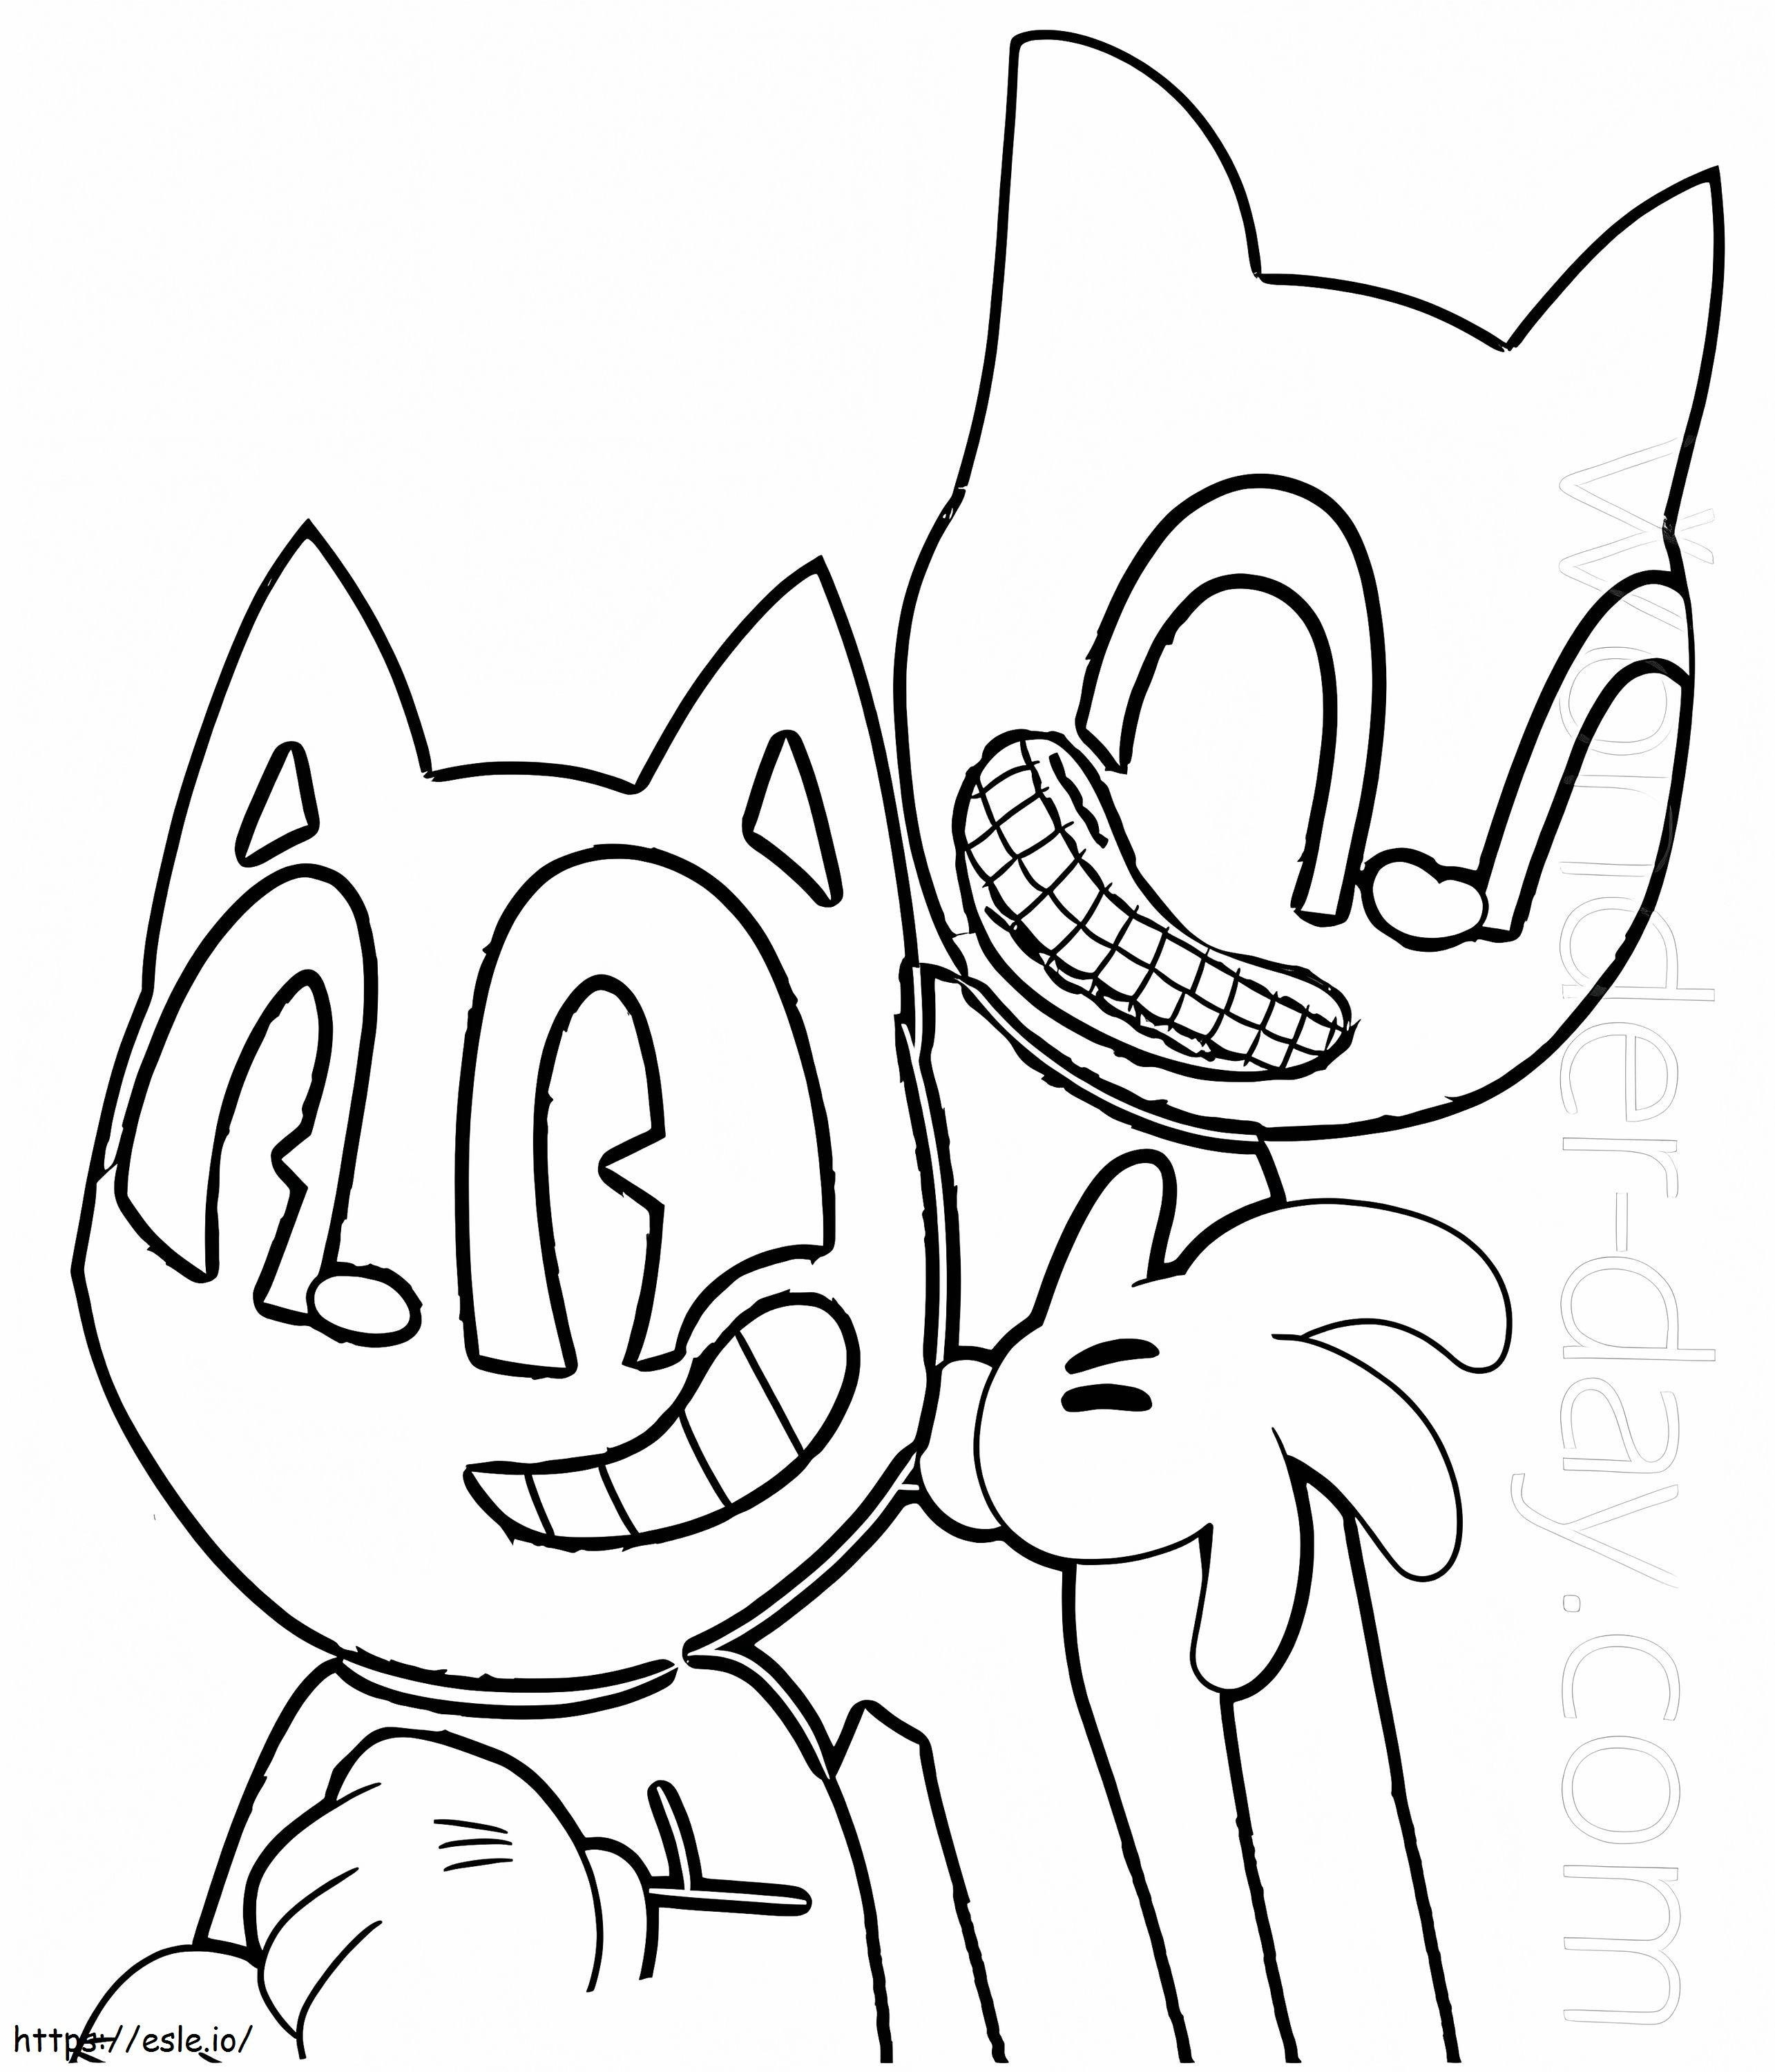 Cartoon Cats coloring page